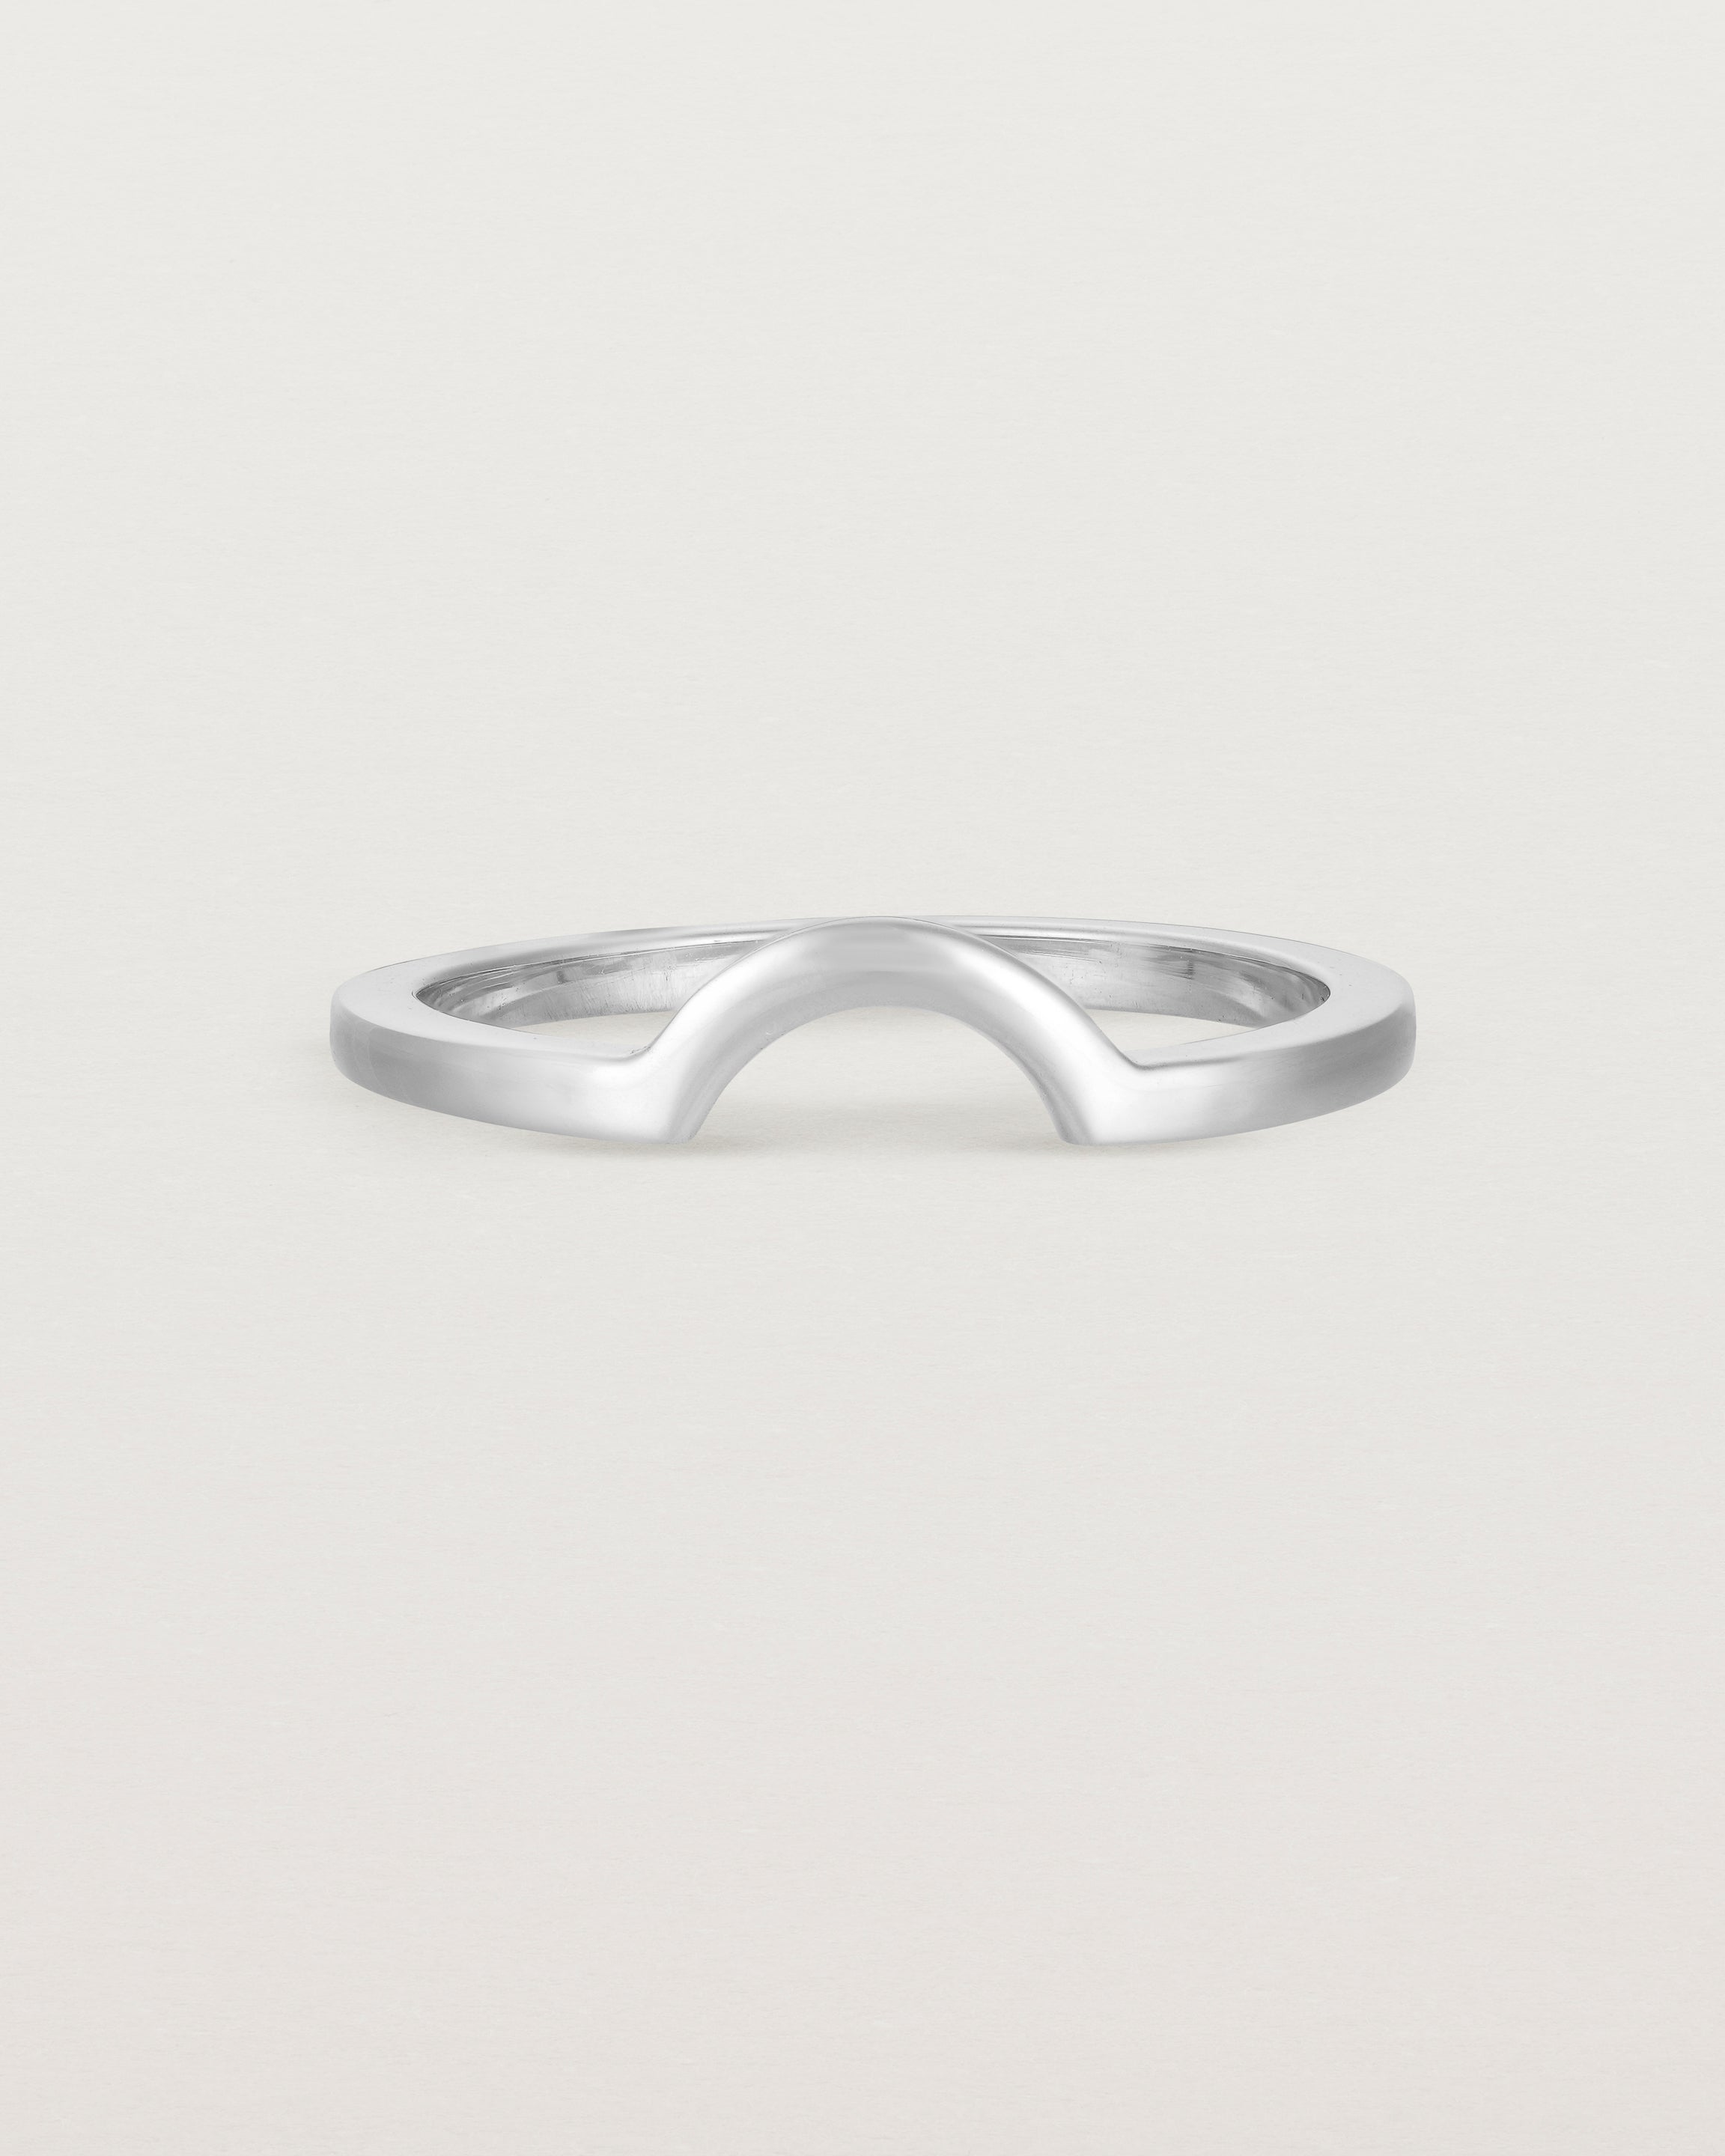 A classic small arc crown ring crafted in white gold